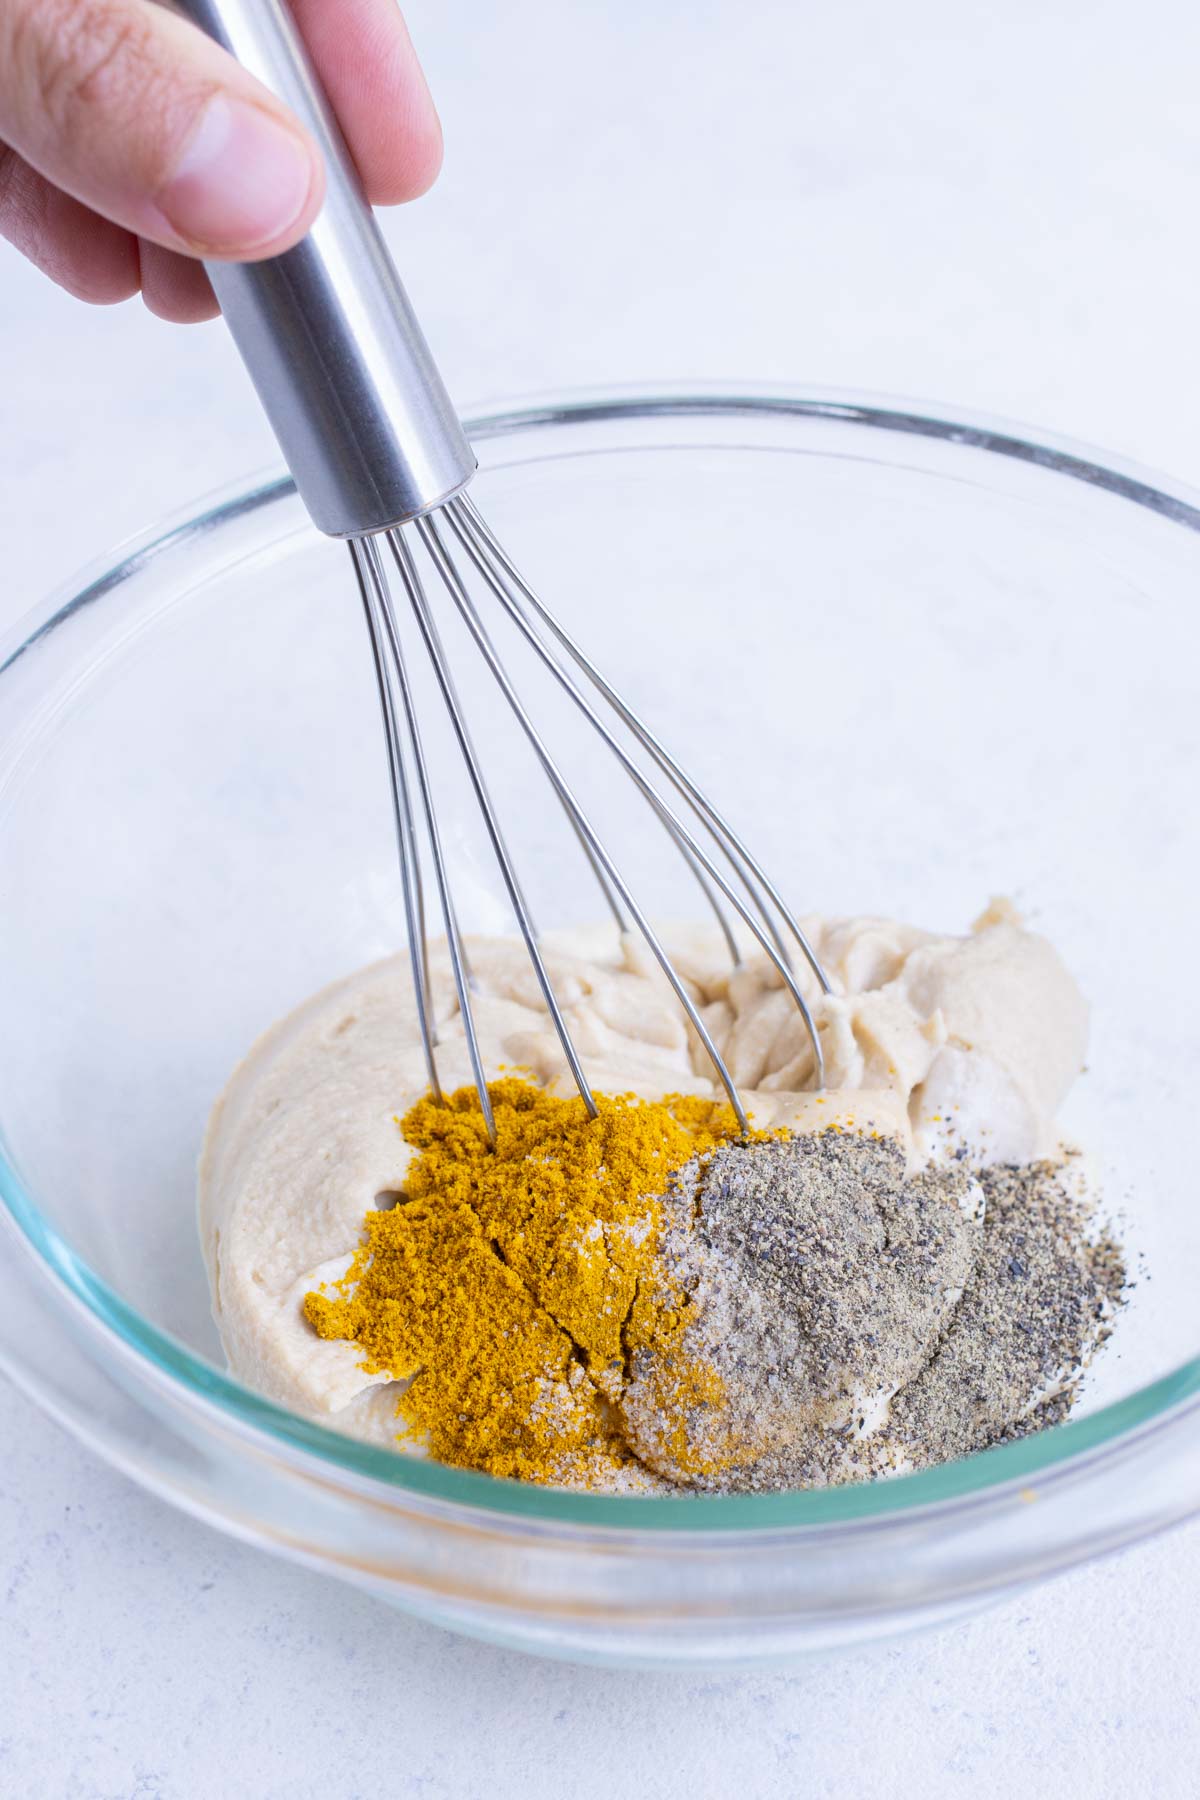 Curry powder, mayonnaise, dijon mustard, salt, and pepper are combined in a bowl.